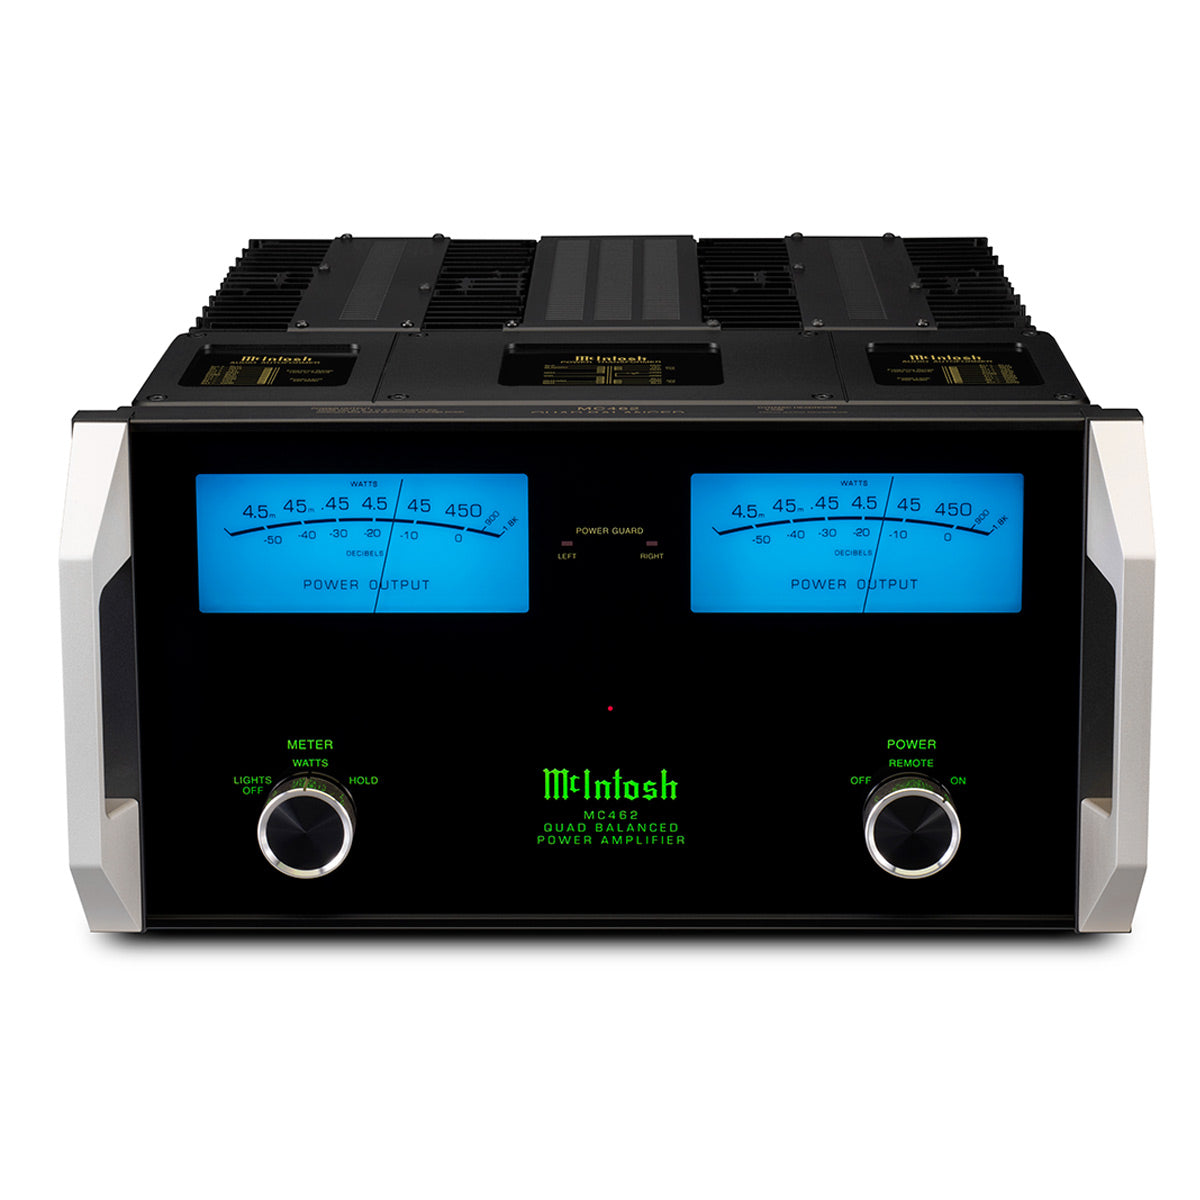 McIntosh MC462 2-Channel Solid State Power Amplifier